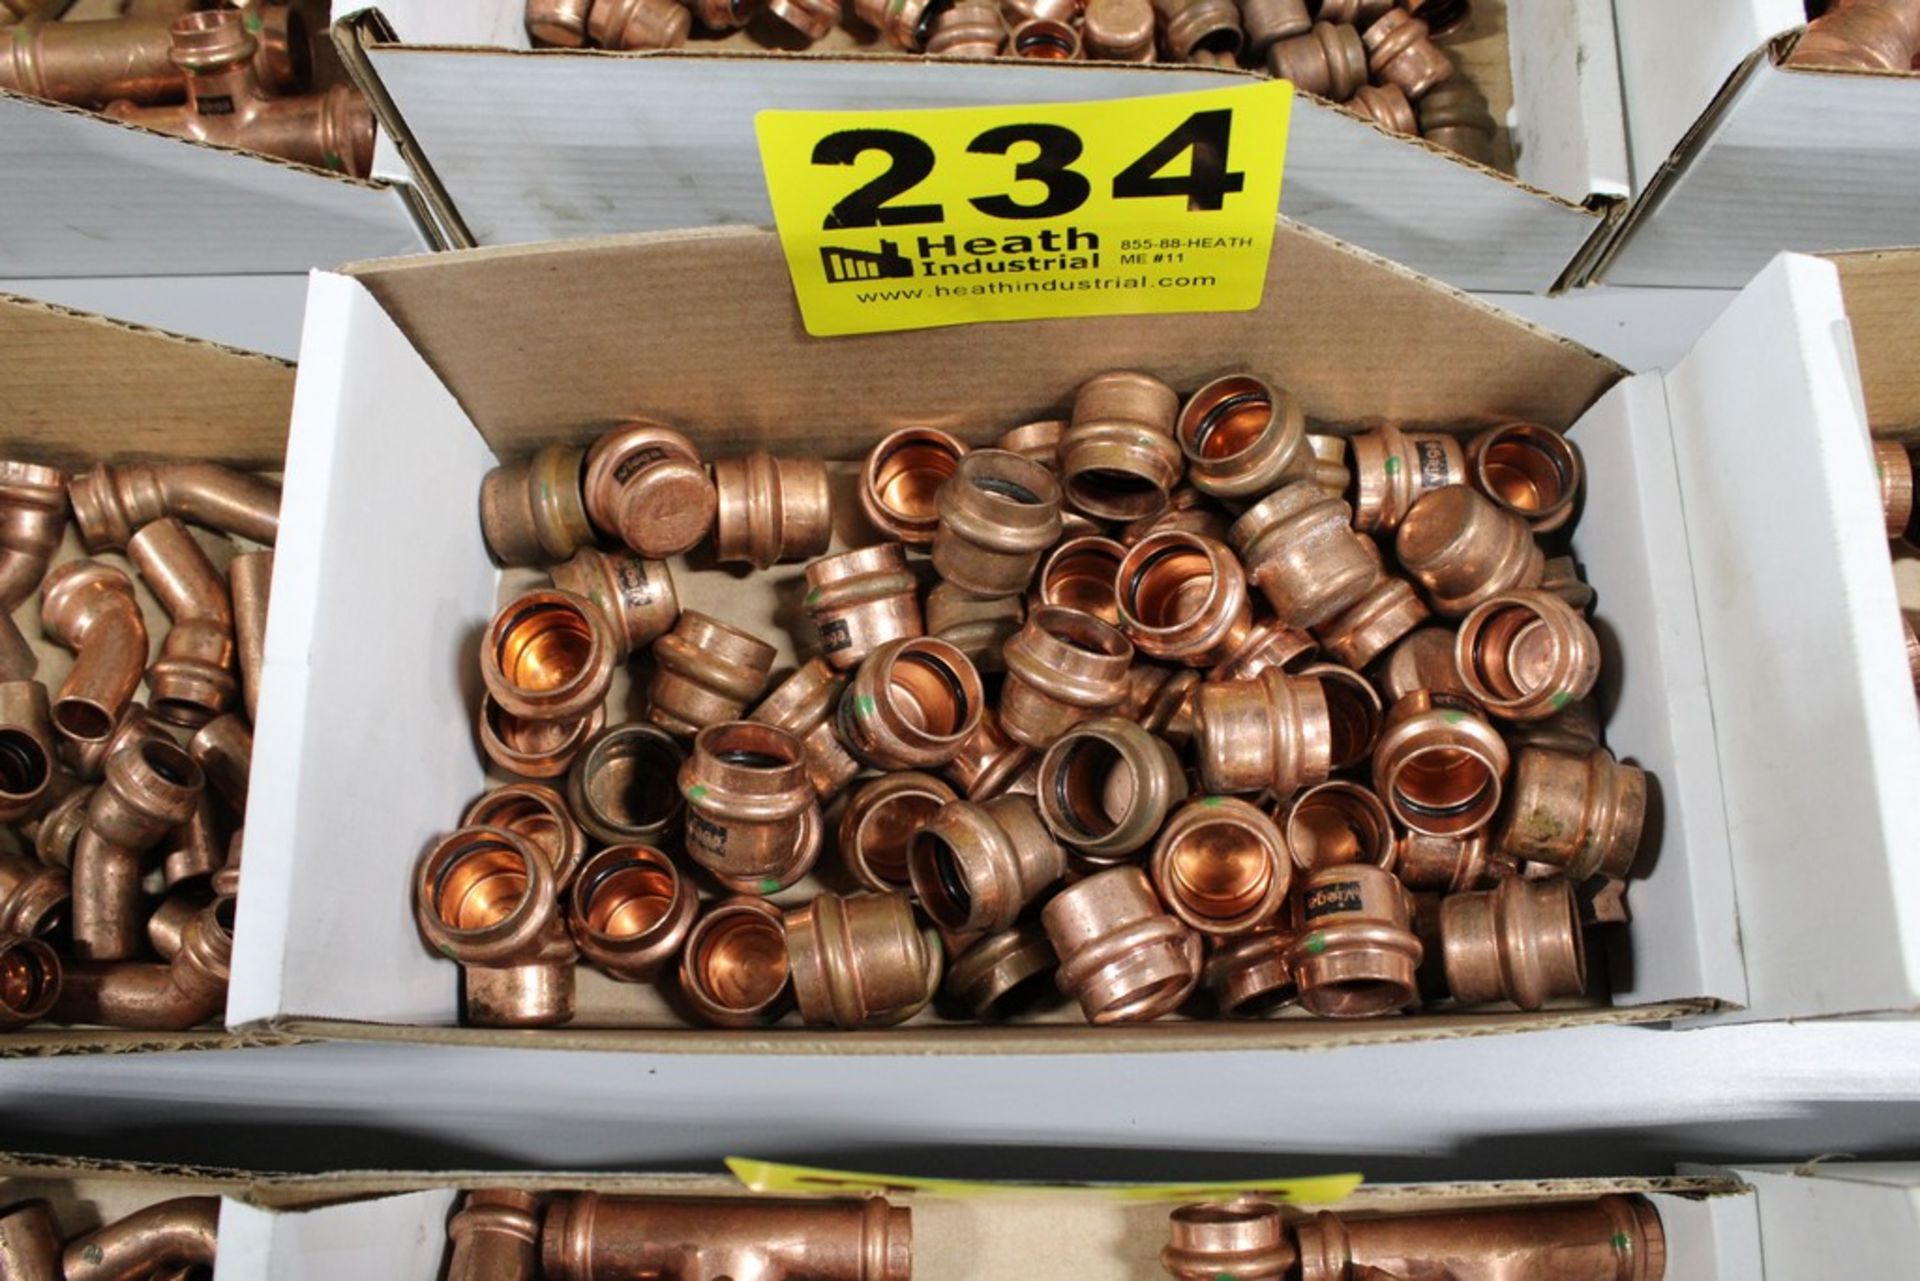 ASSORTED VIEGA COPPER PIPE FITTINGS IN BOX